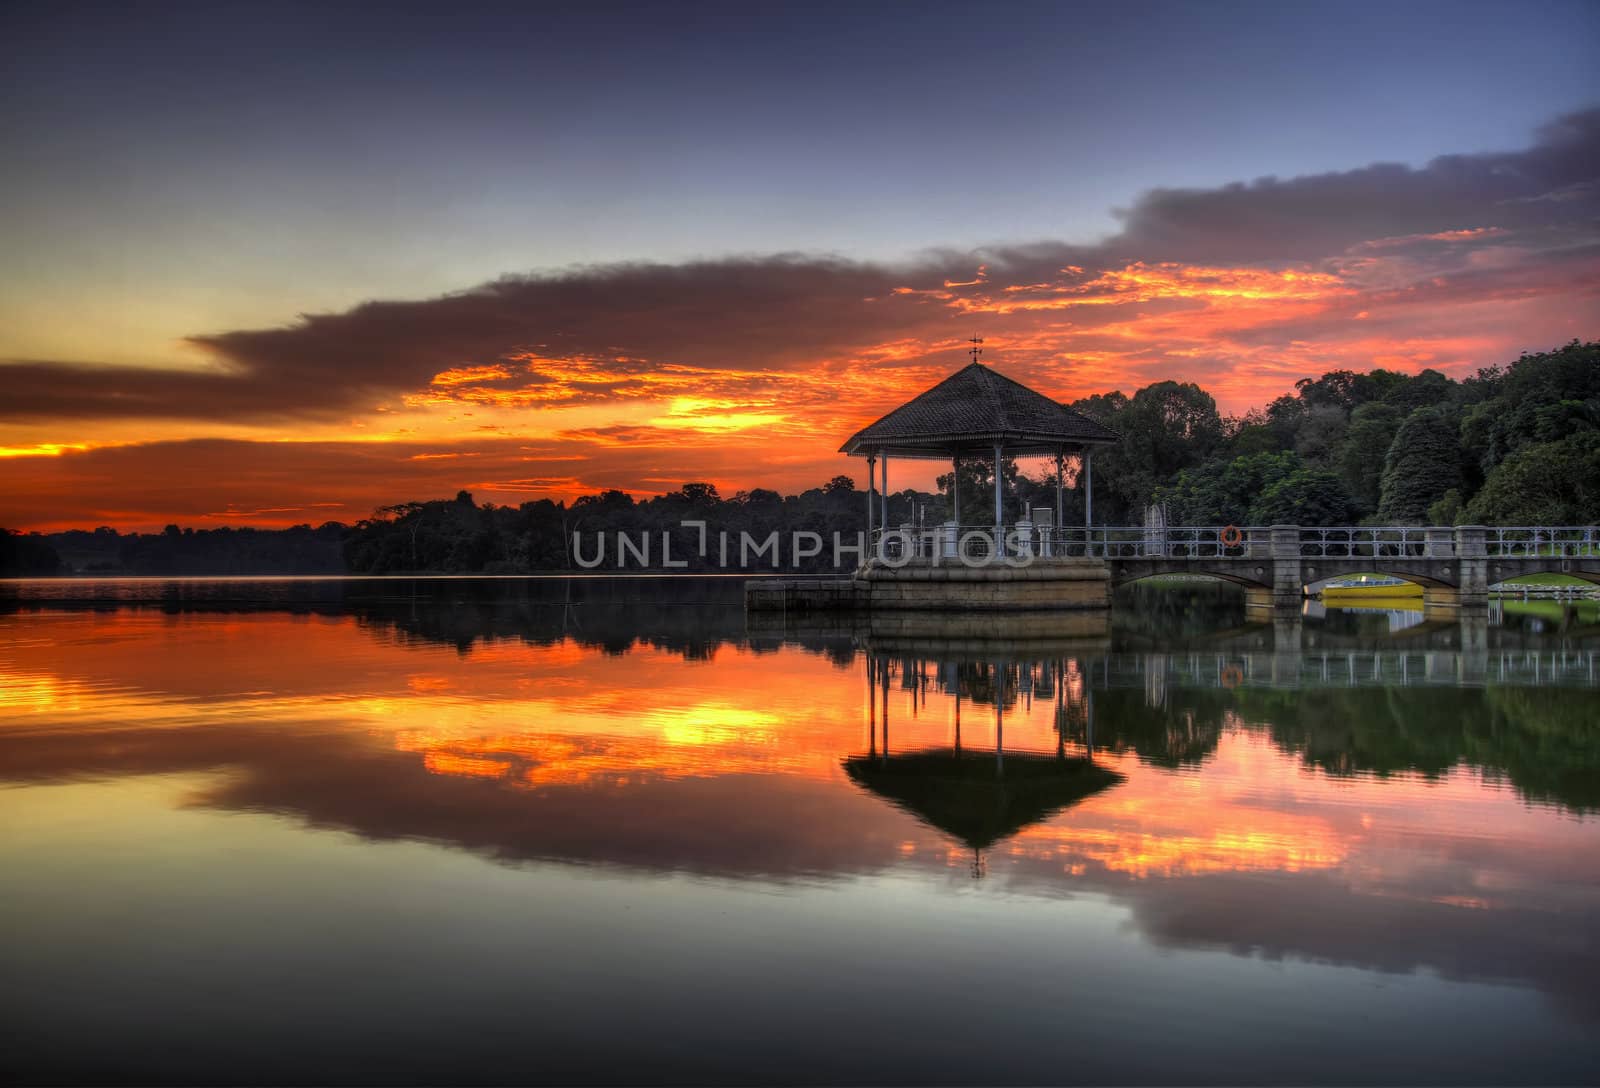 Sunset at the Lower Peirce Reservoir Lake in Singapore